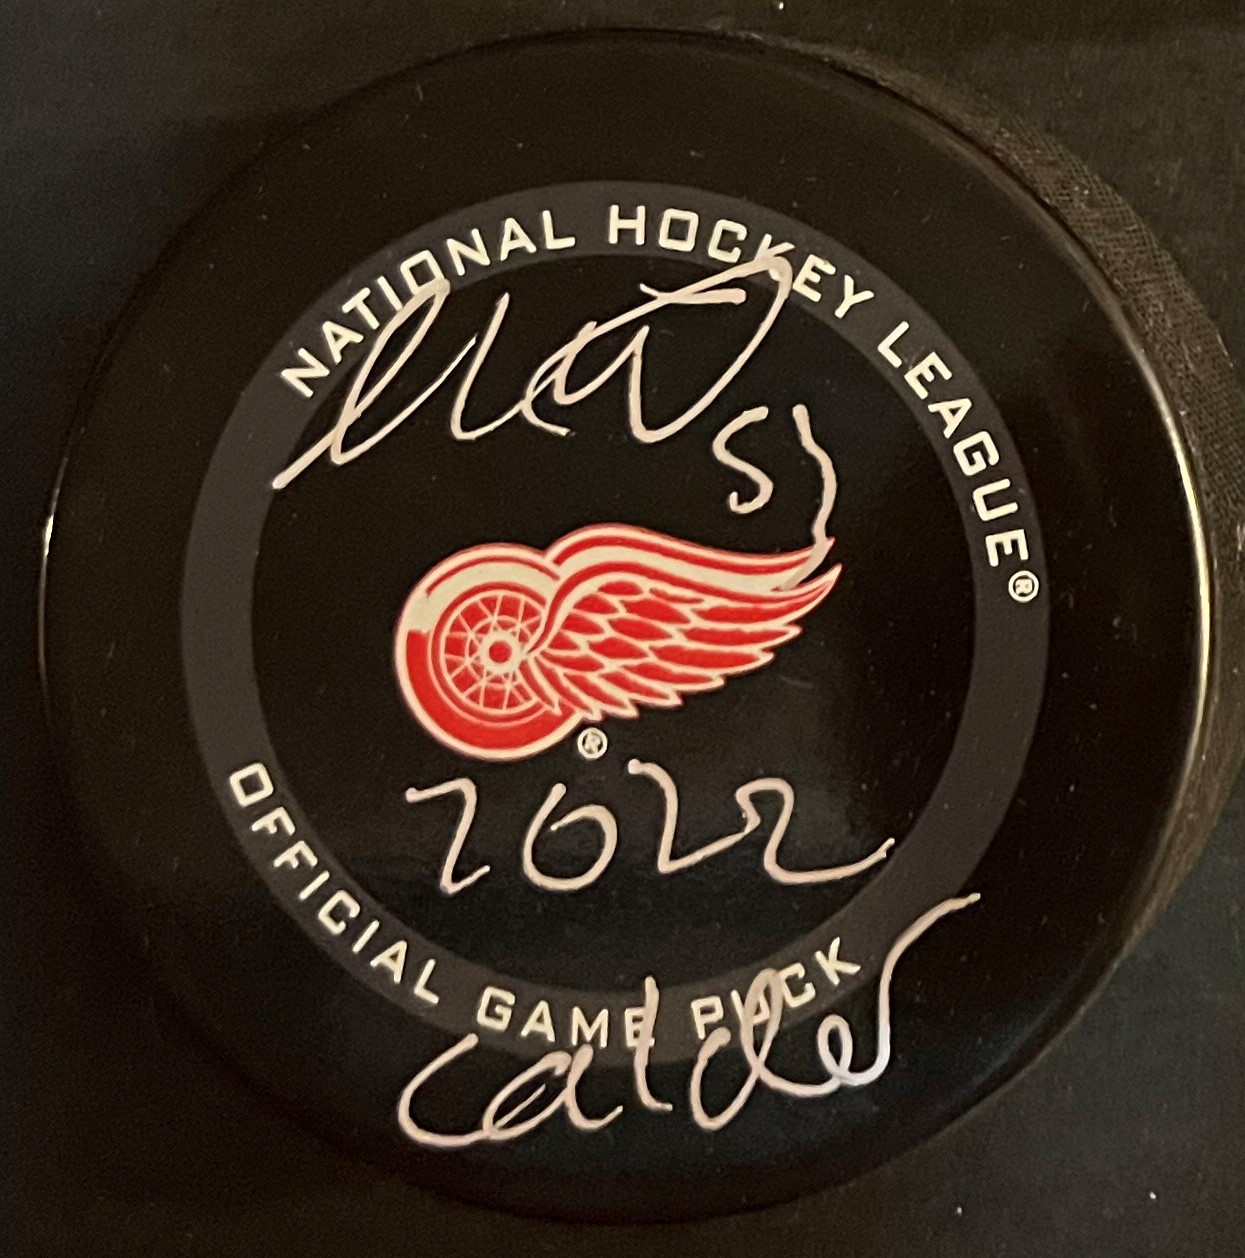 Moritz Seider Detroit Red Wings Autographed 2022-23 Special